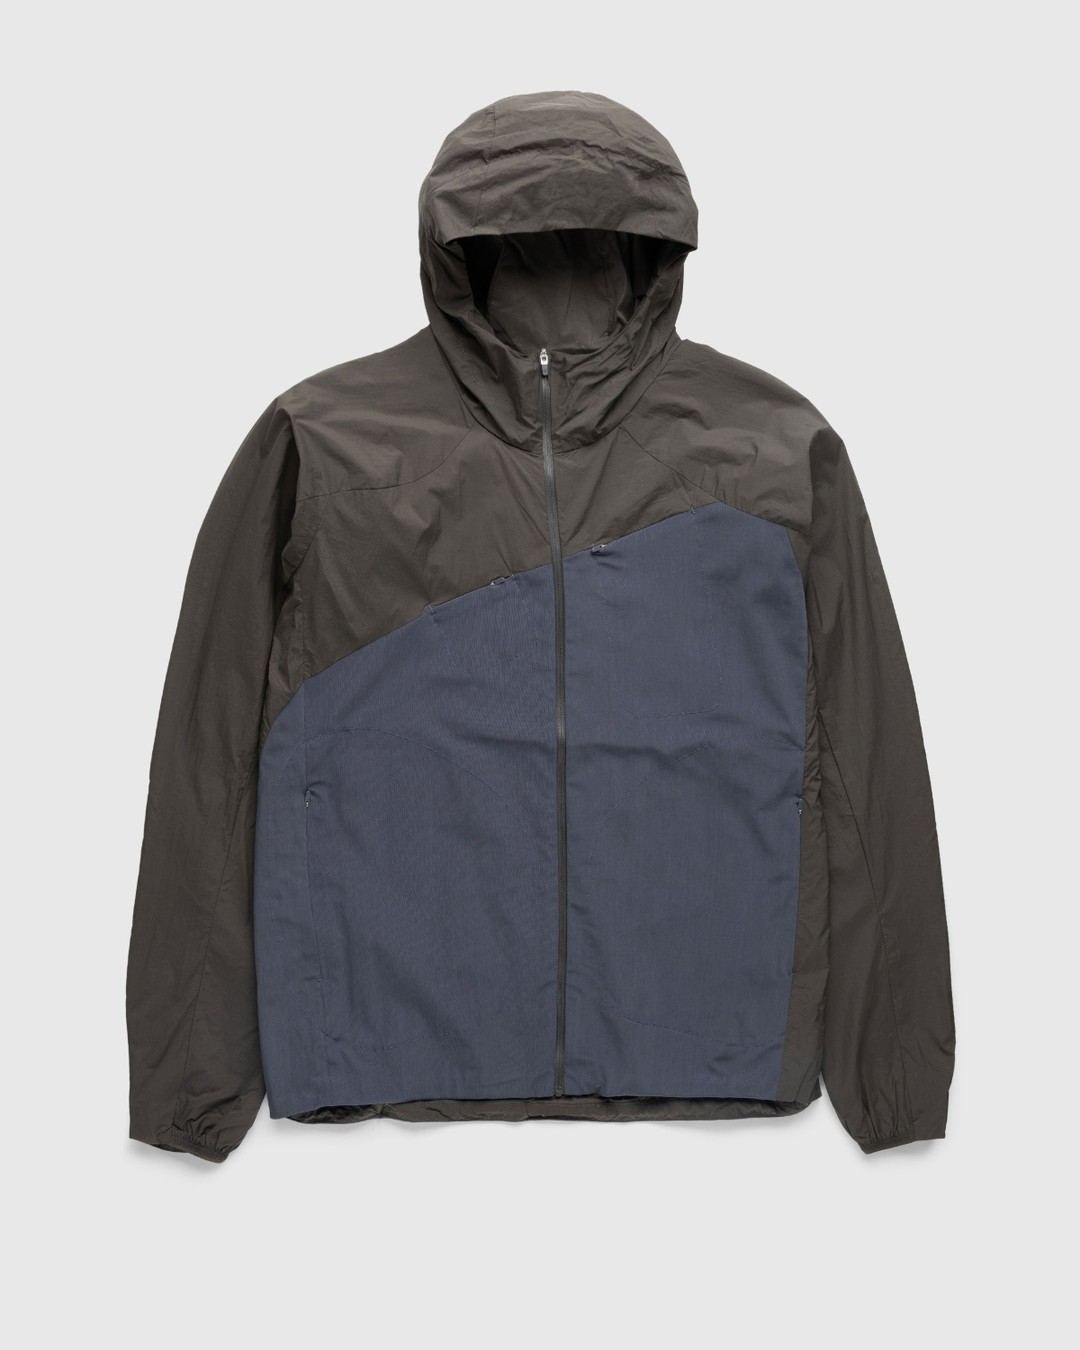 Post Archive Faction (PAF) – 5.1 TECHNICAL JACKET CENTER